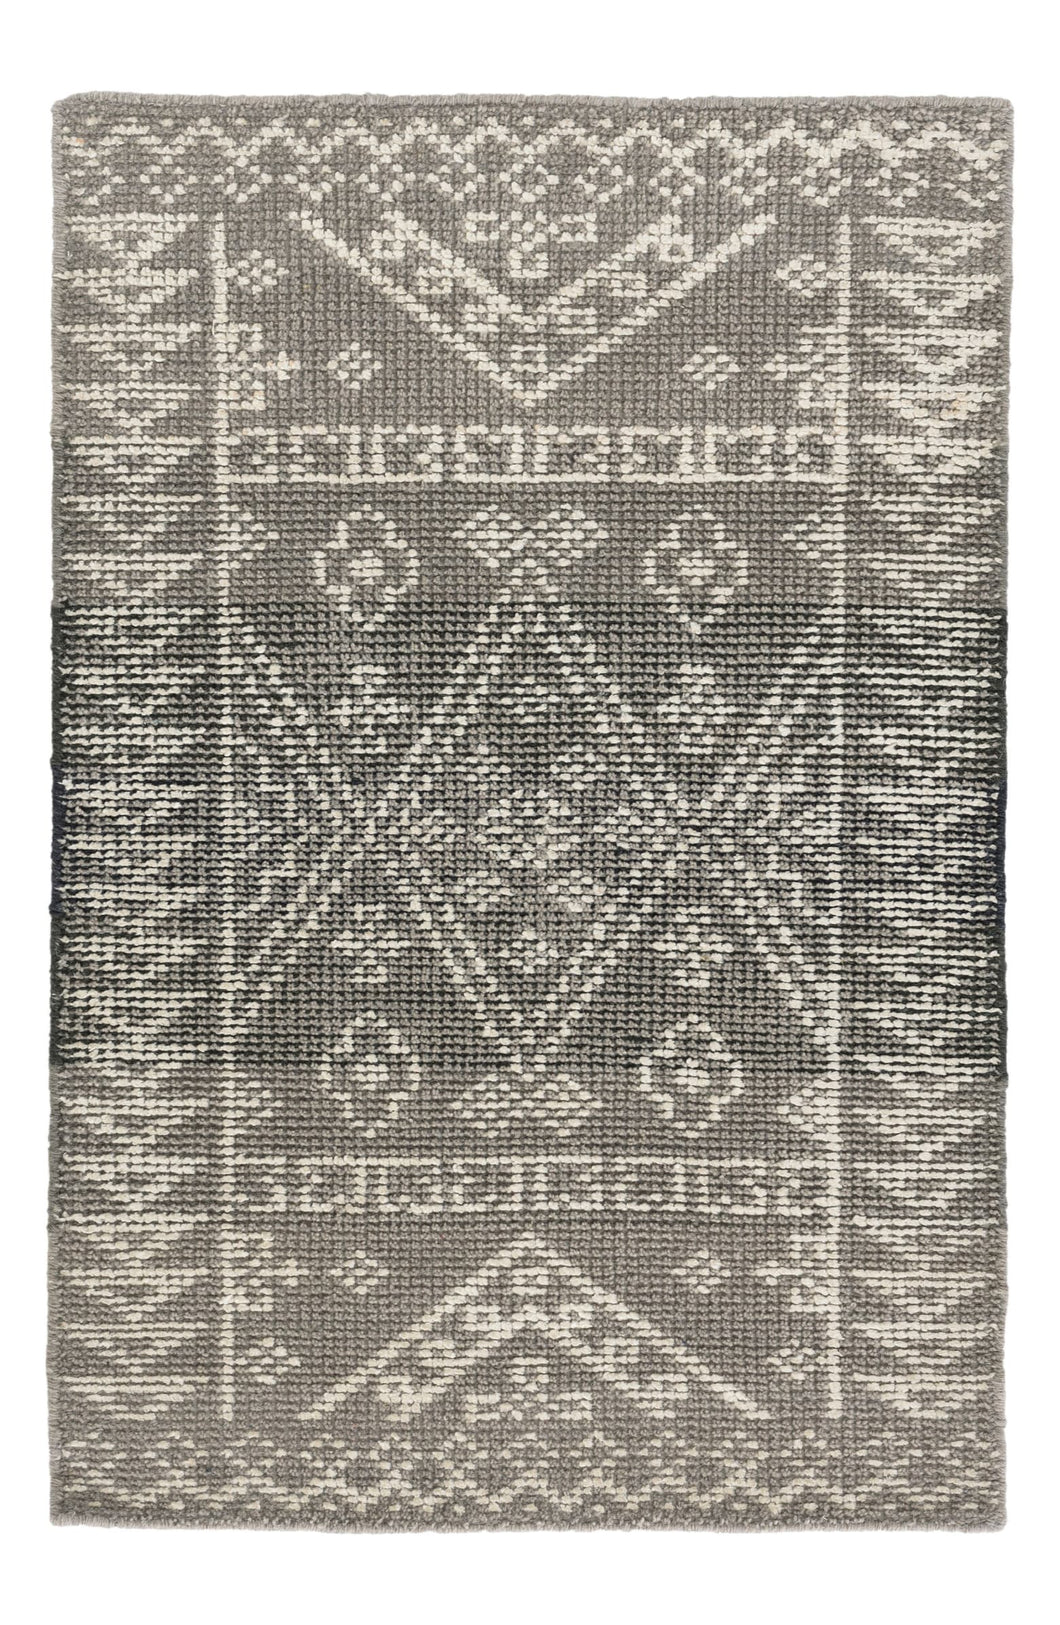 Arelli Hand Knotted Wool/Viscose Rug, 8' x 10'